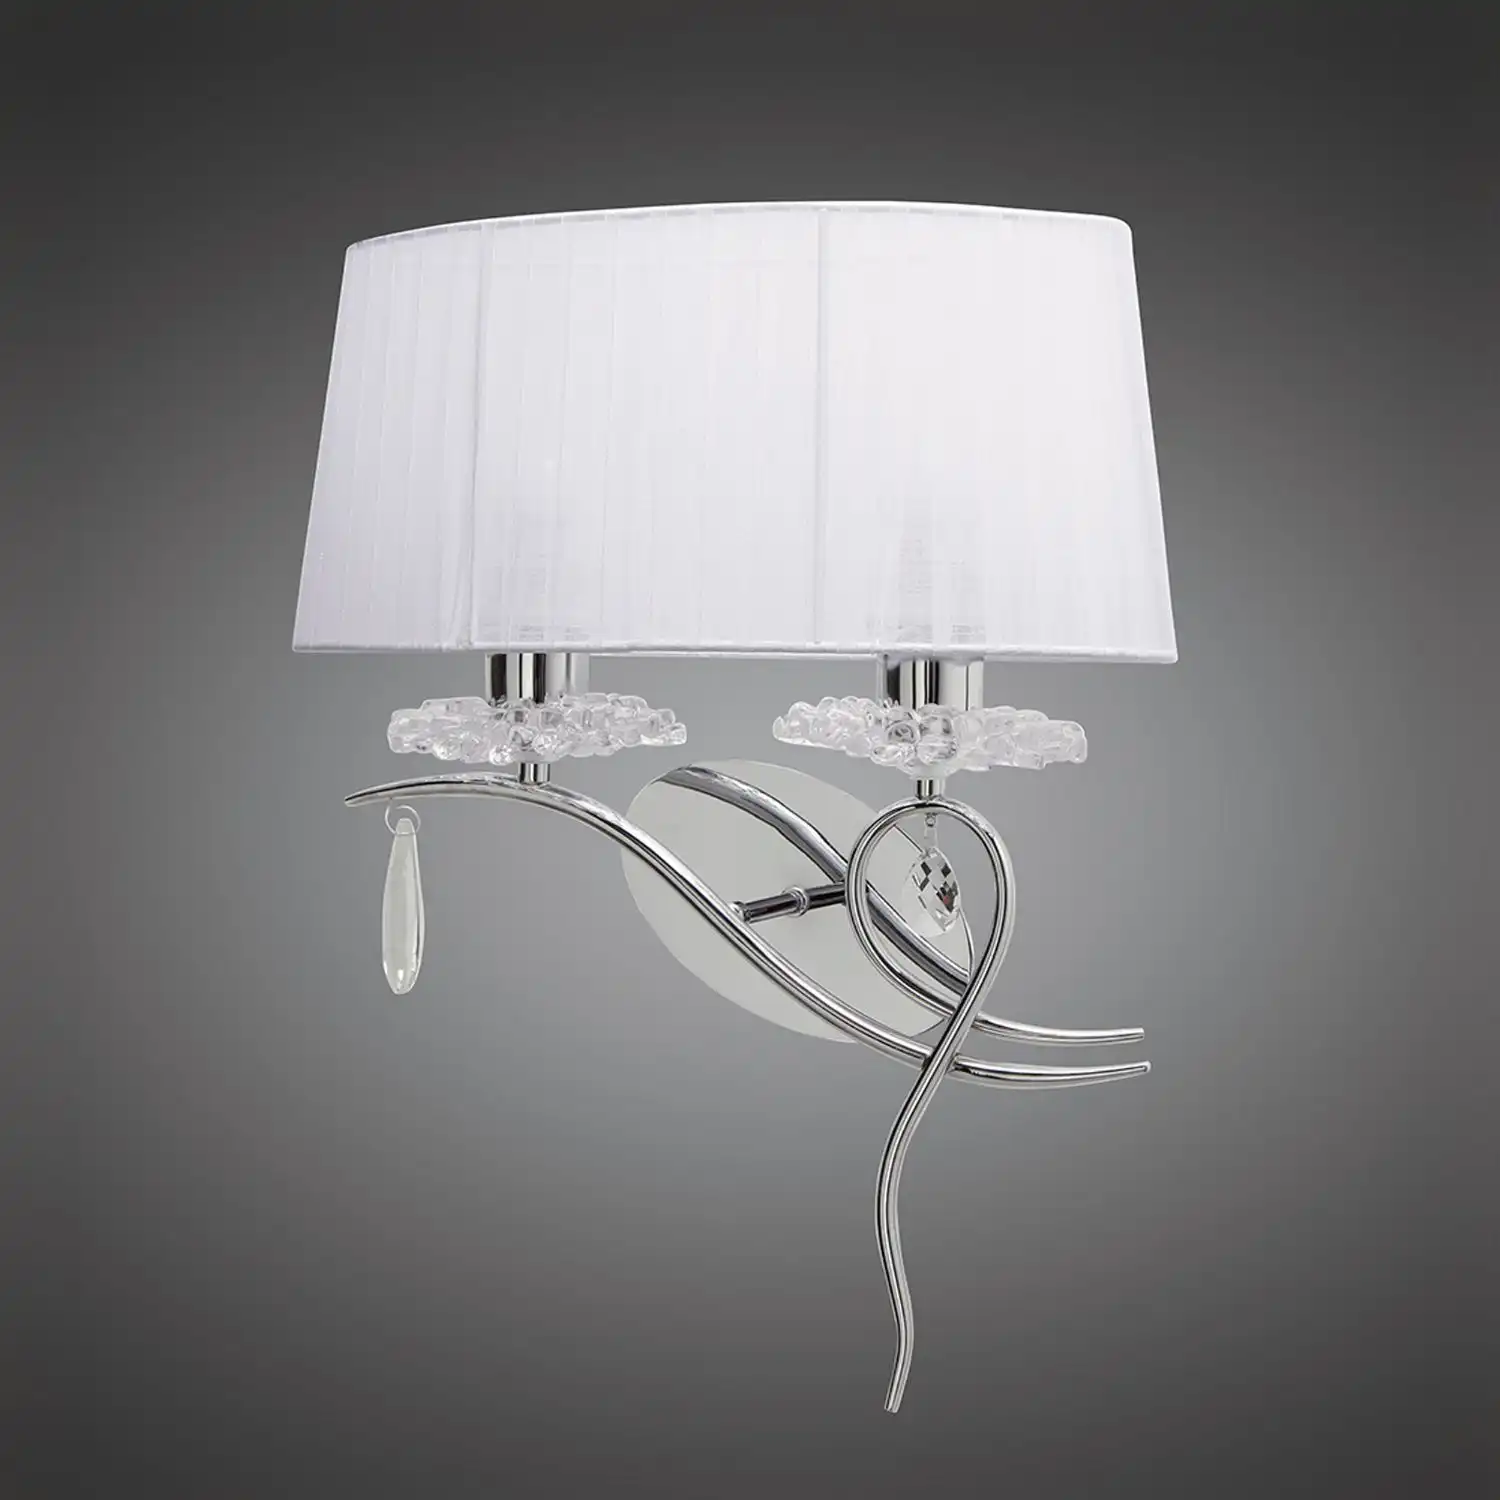 Louise Wall Lamp Left 2 Light E27 With White Shade Polished Chrome Clear Crystal